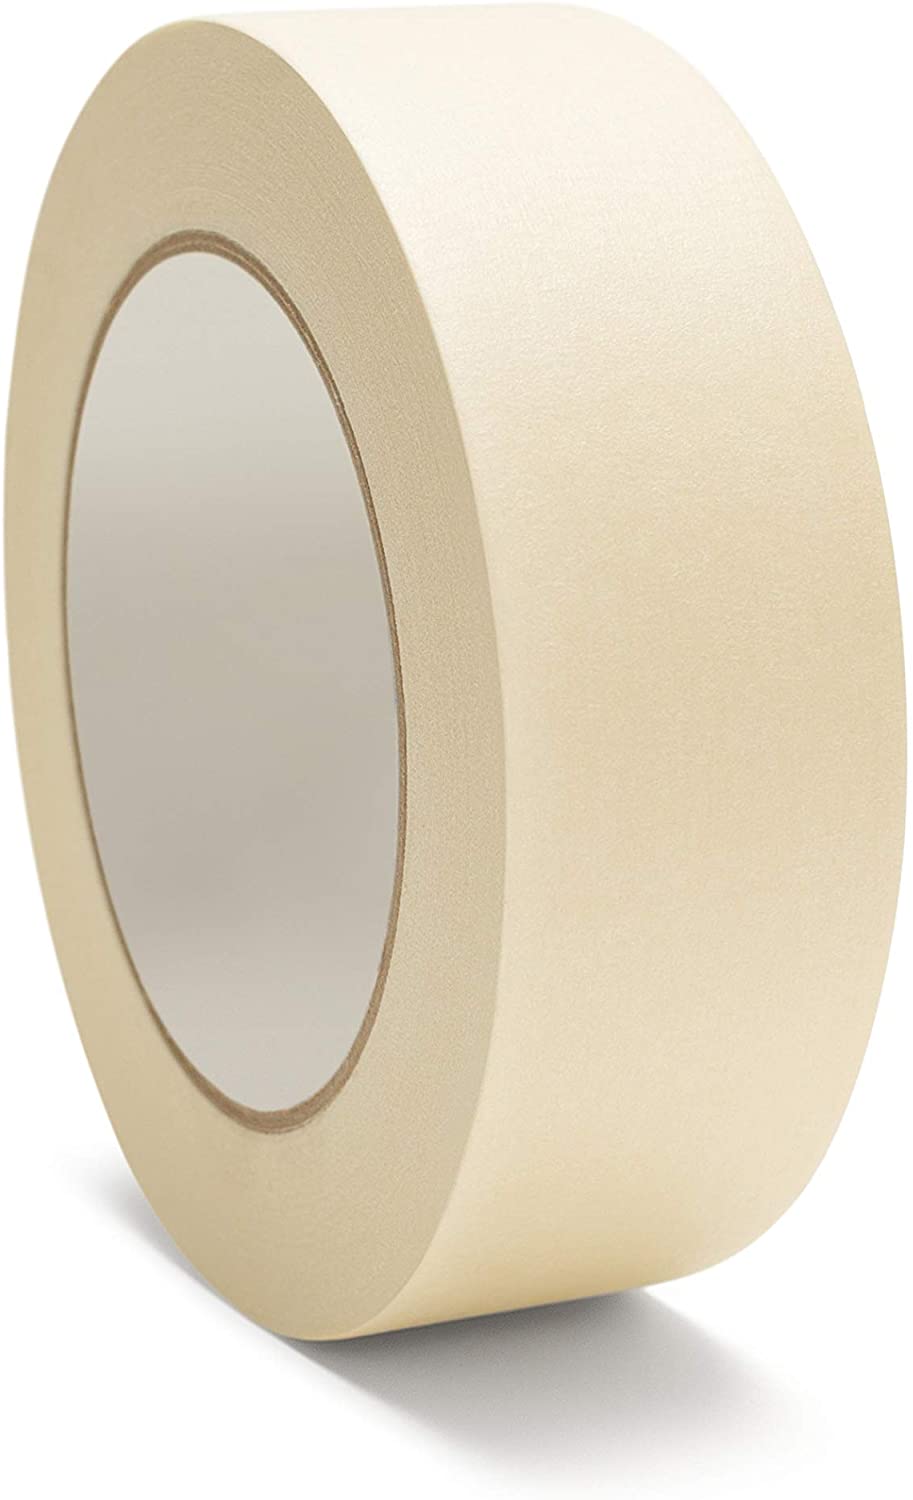 3M - Masking Tape, 3 Inch x 60 Yards - The Stationery Store & Authorized  FedEx Ship Centre